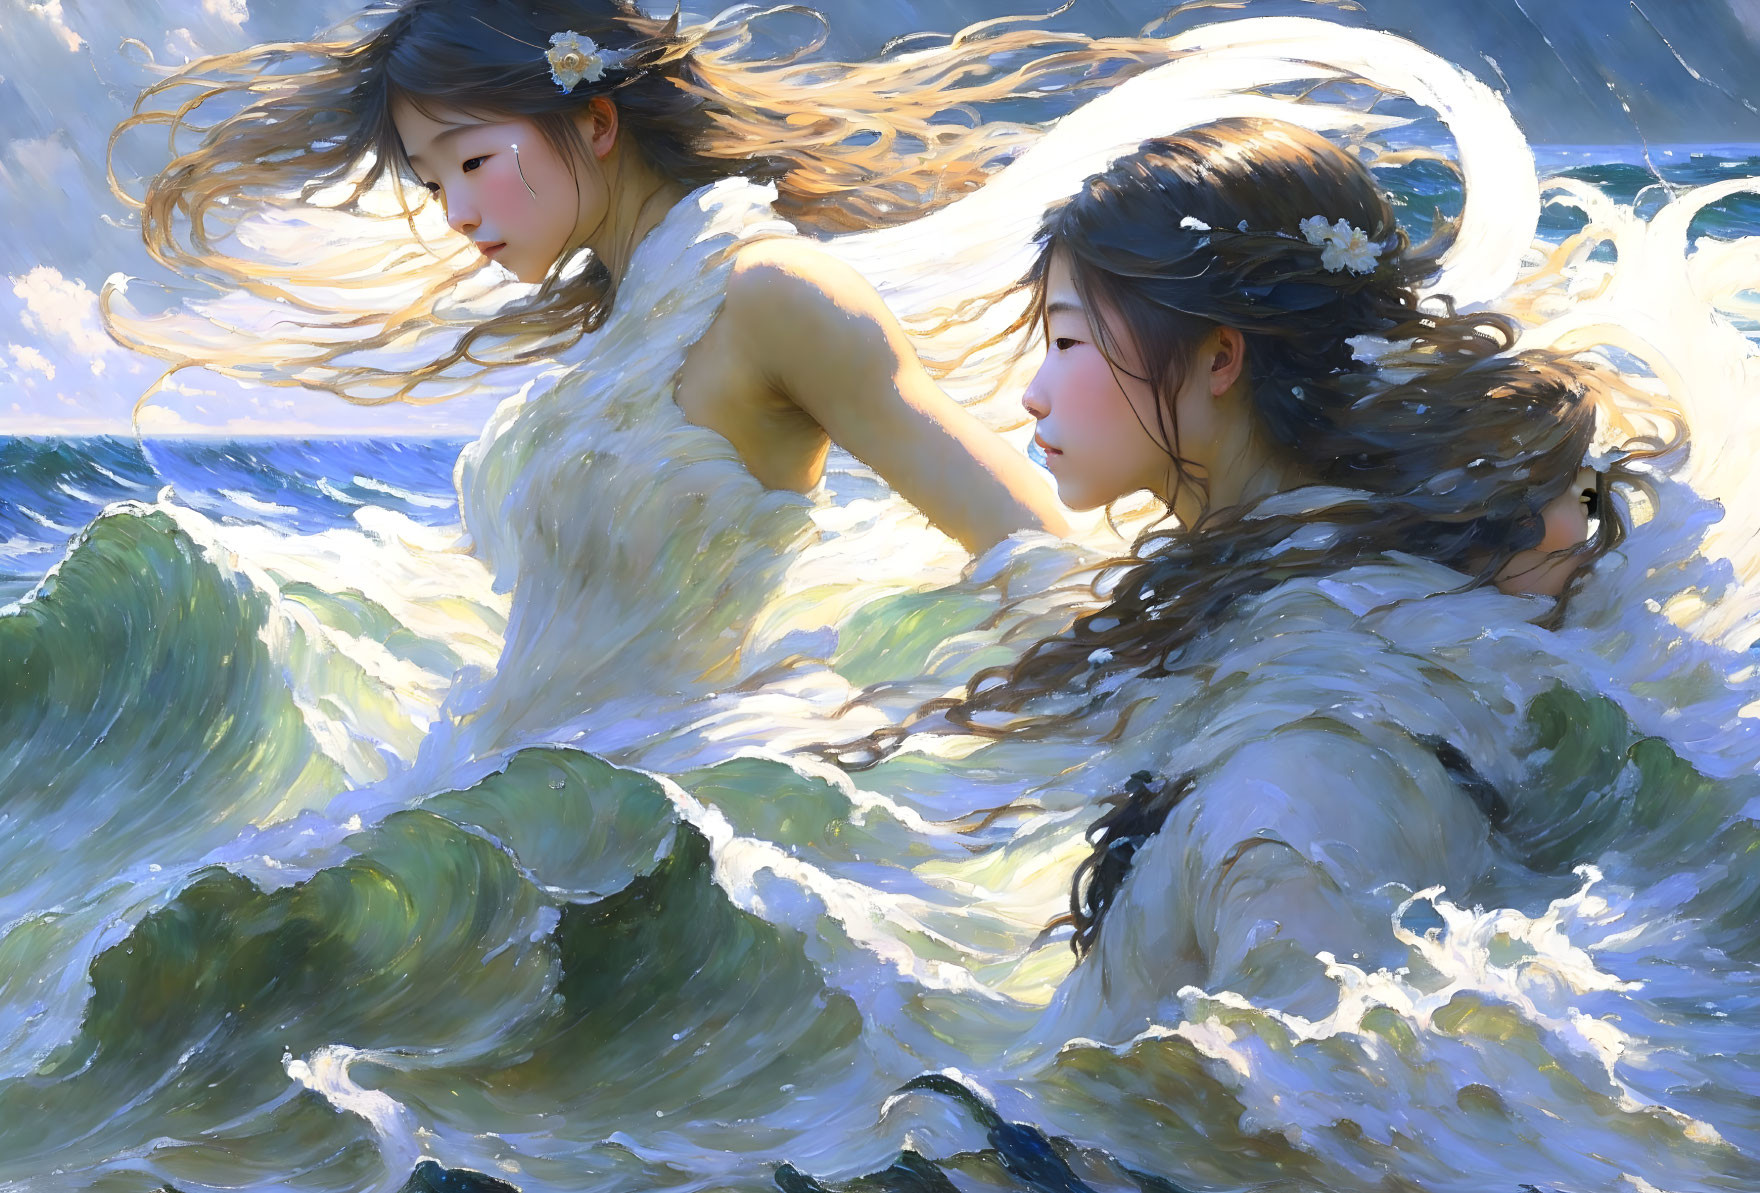 Ethereal women merge with sea waves under gleaming sun